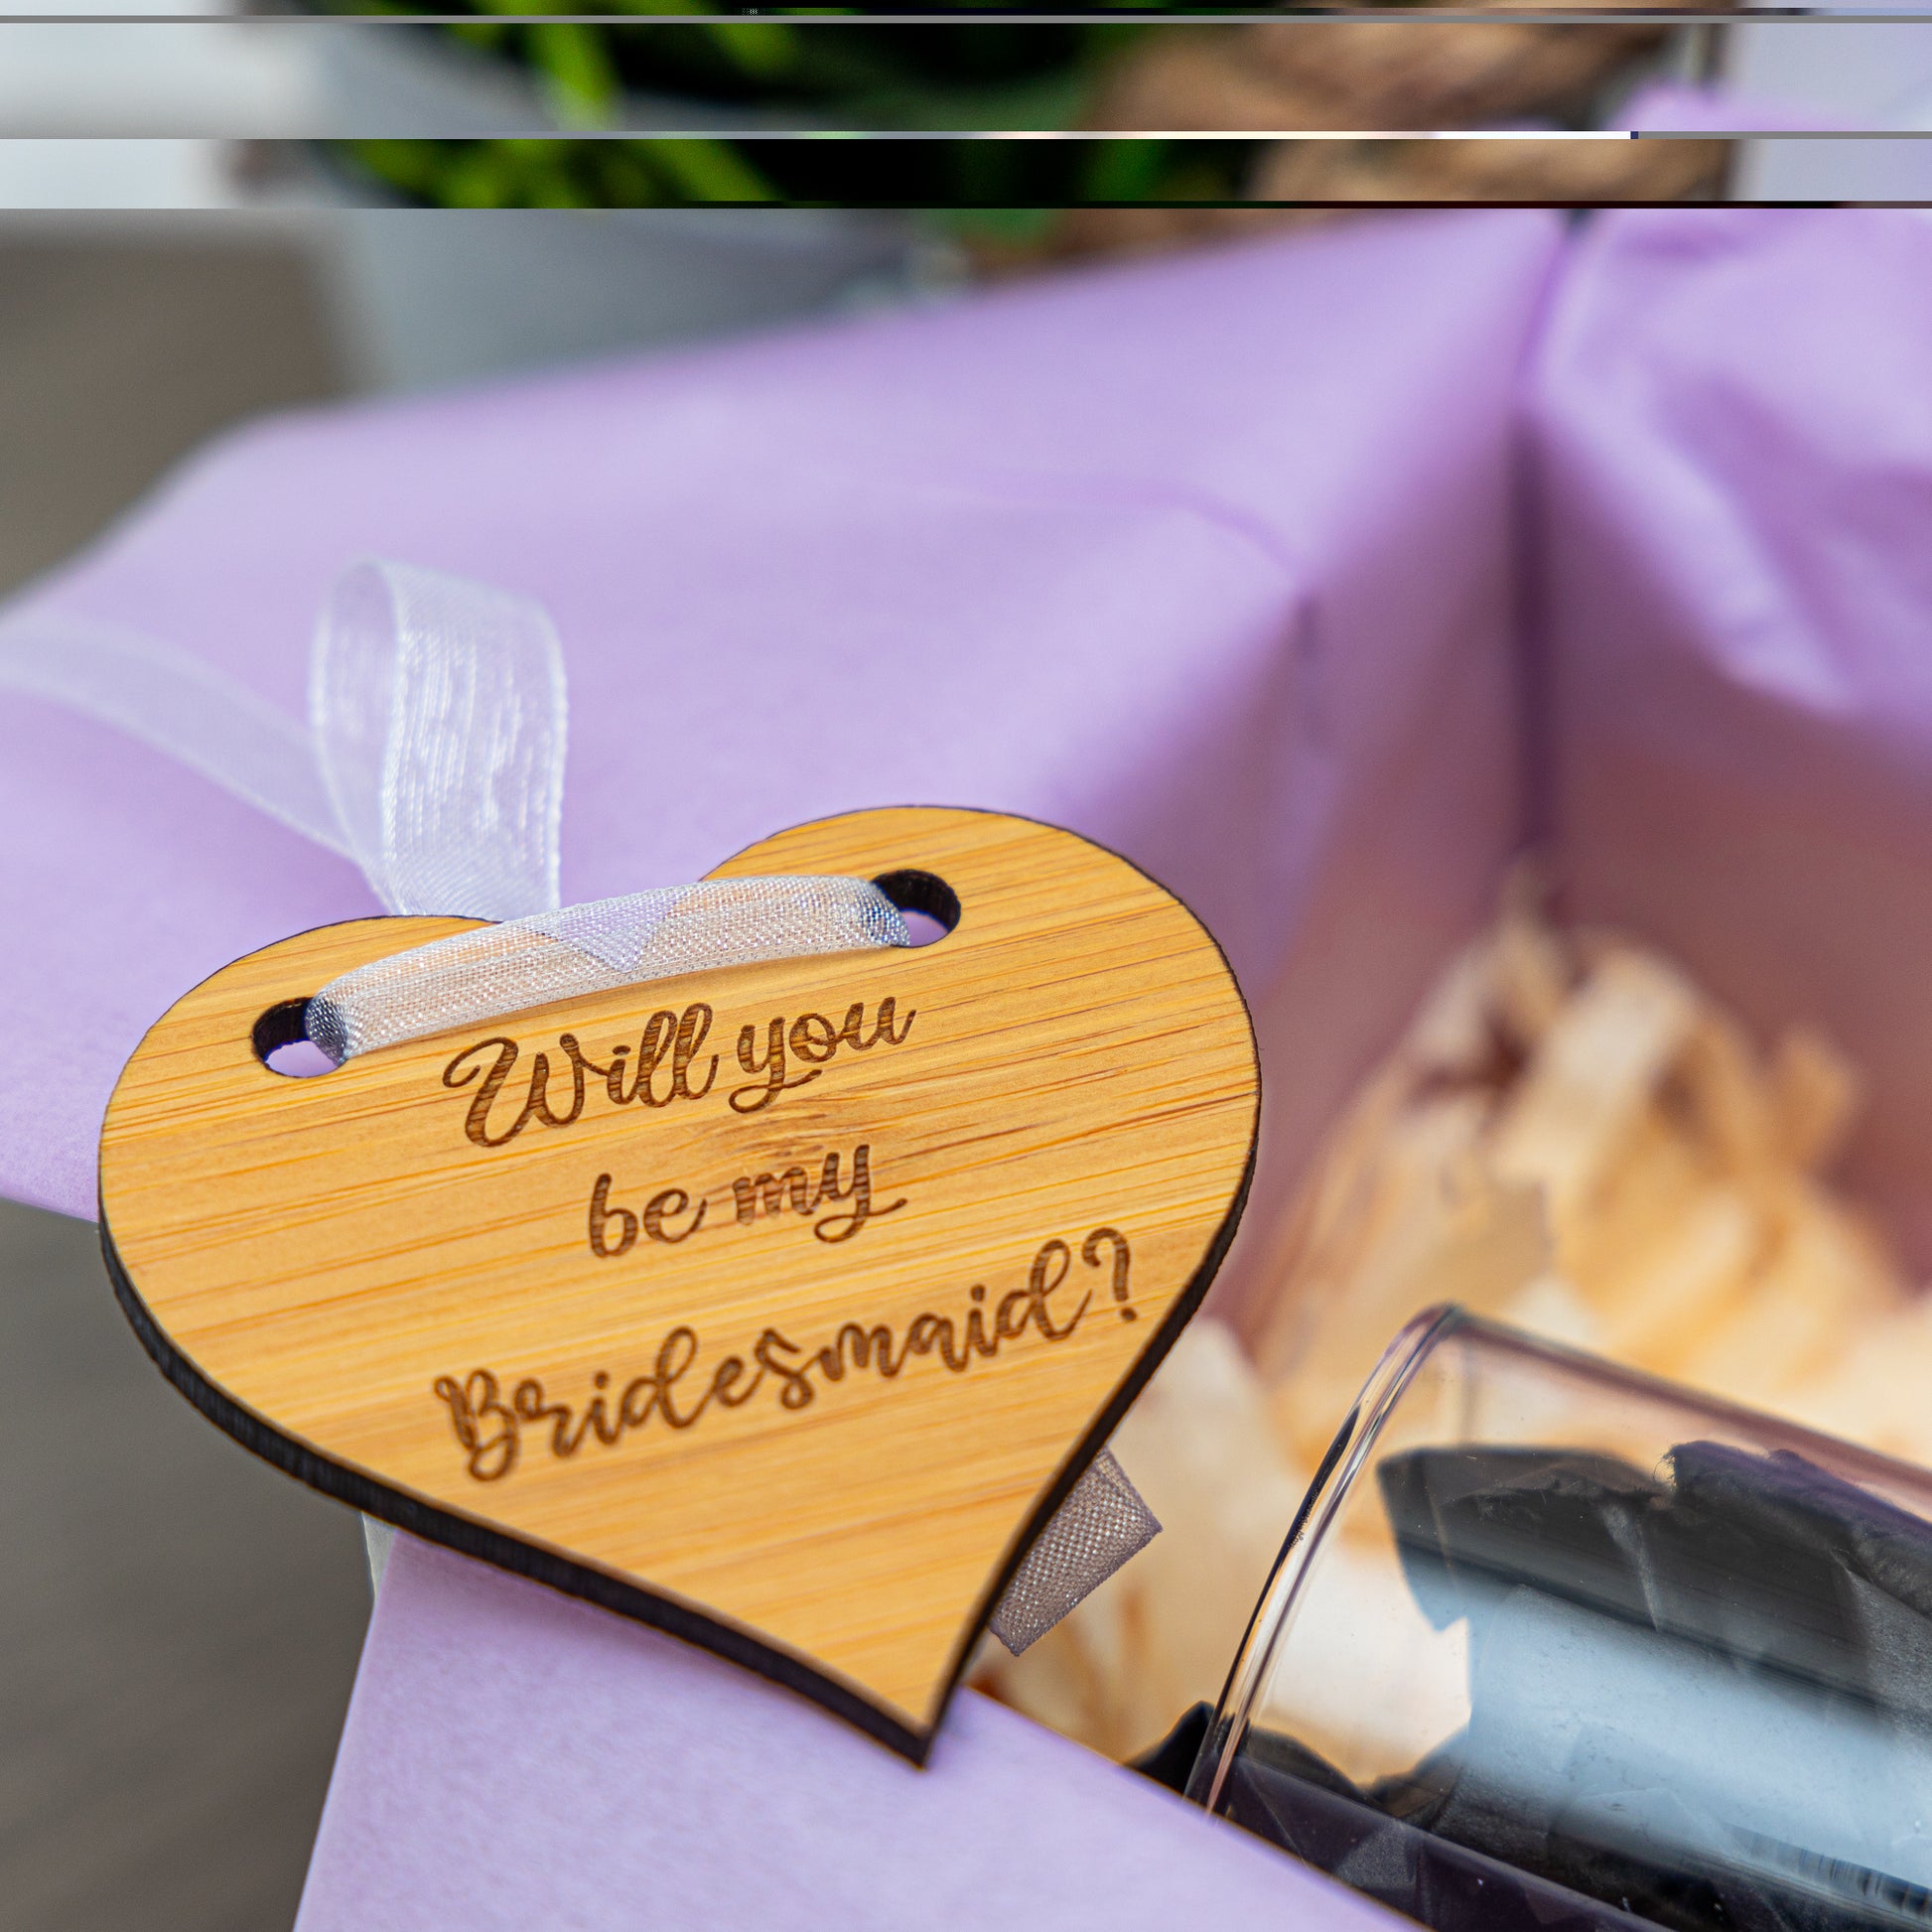 Bridesmaid Proposal Giftbox with Engraved Champagne Glass  - Always Looking Good -   